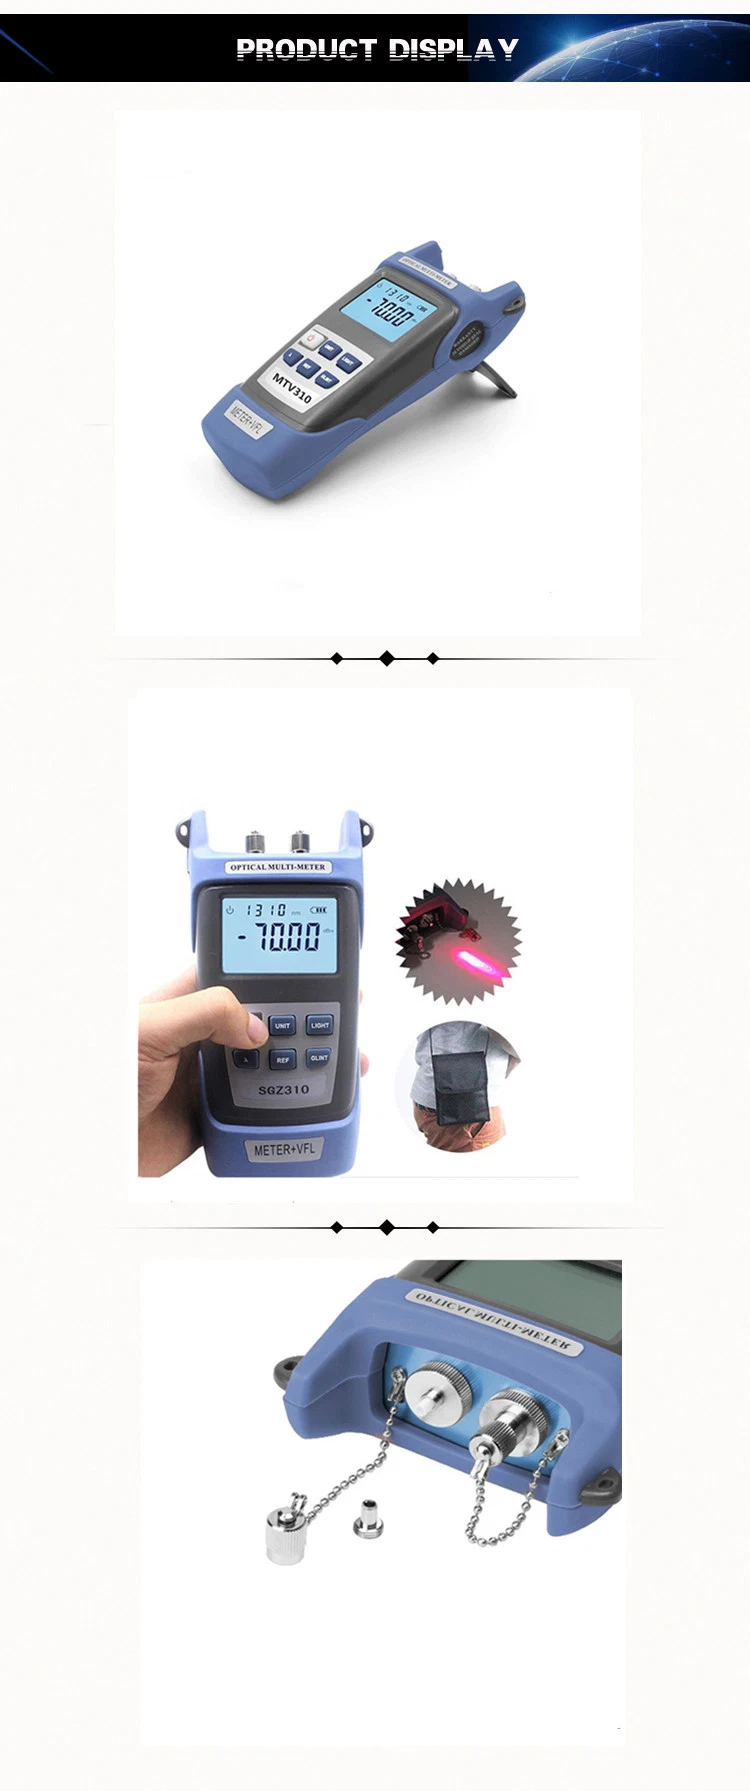 Portable Opm Cable Tester Handheld Mini Fiber Optical Power Meter for FTTH FTTB FTTX Network